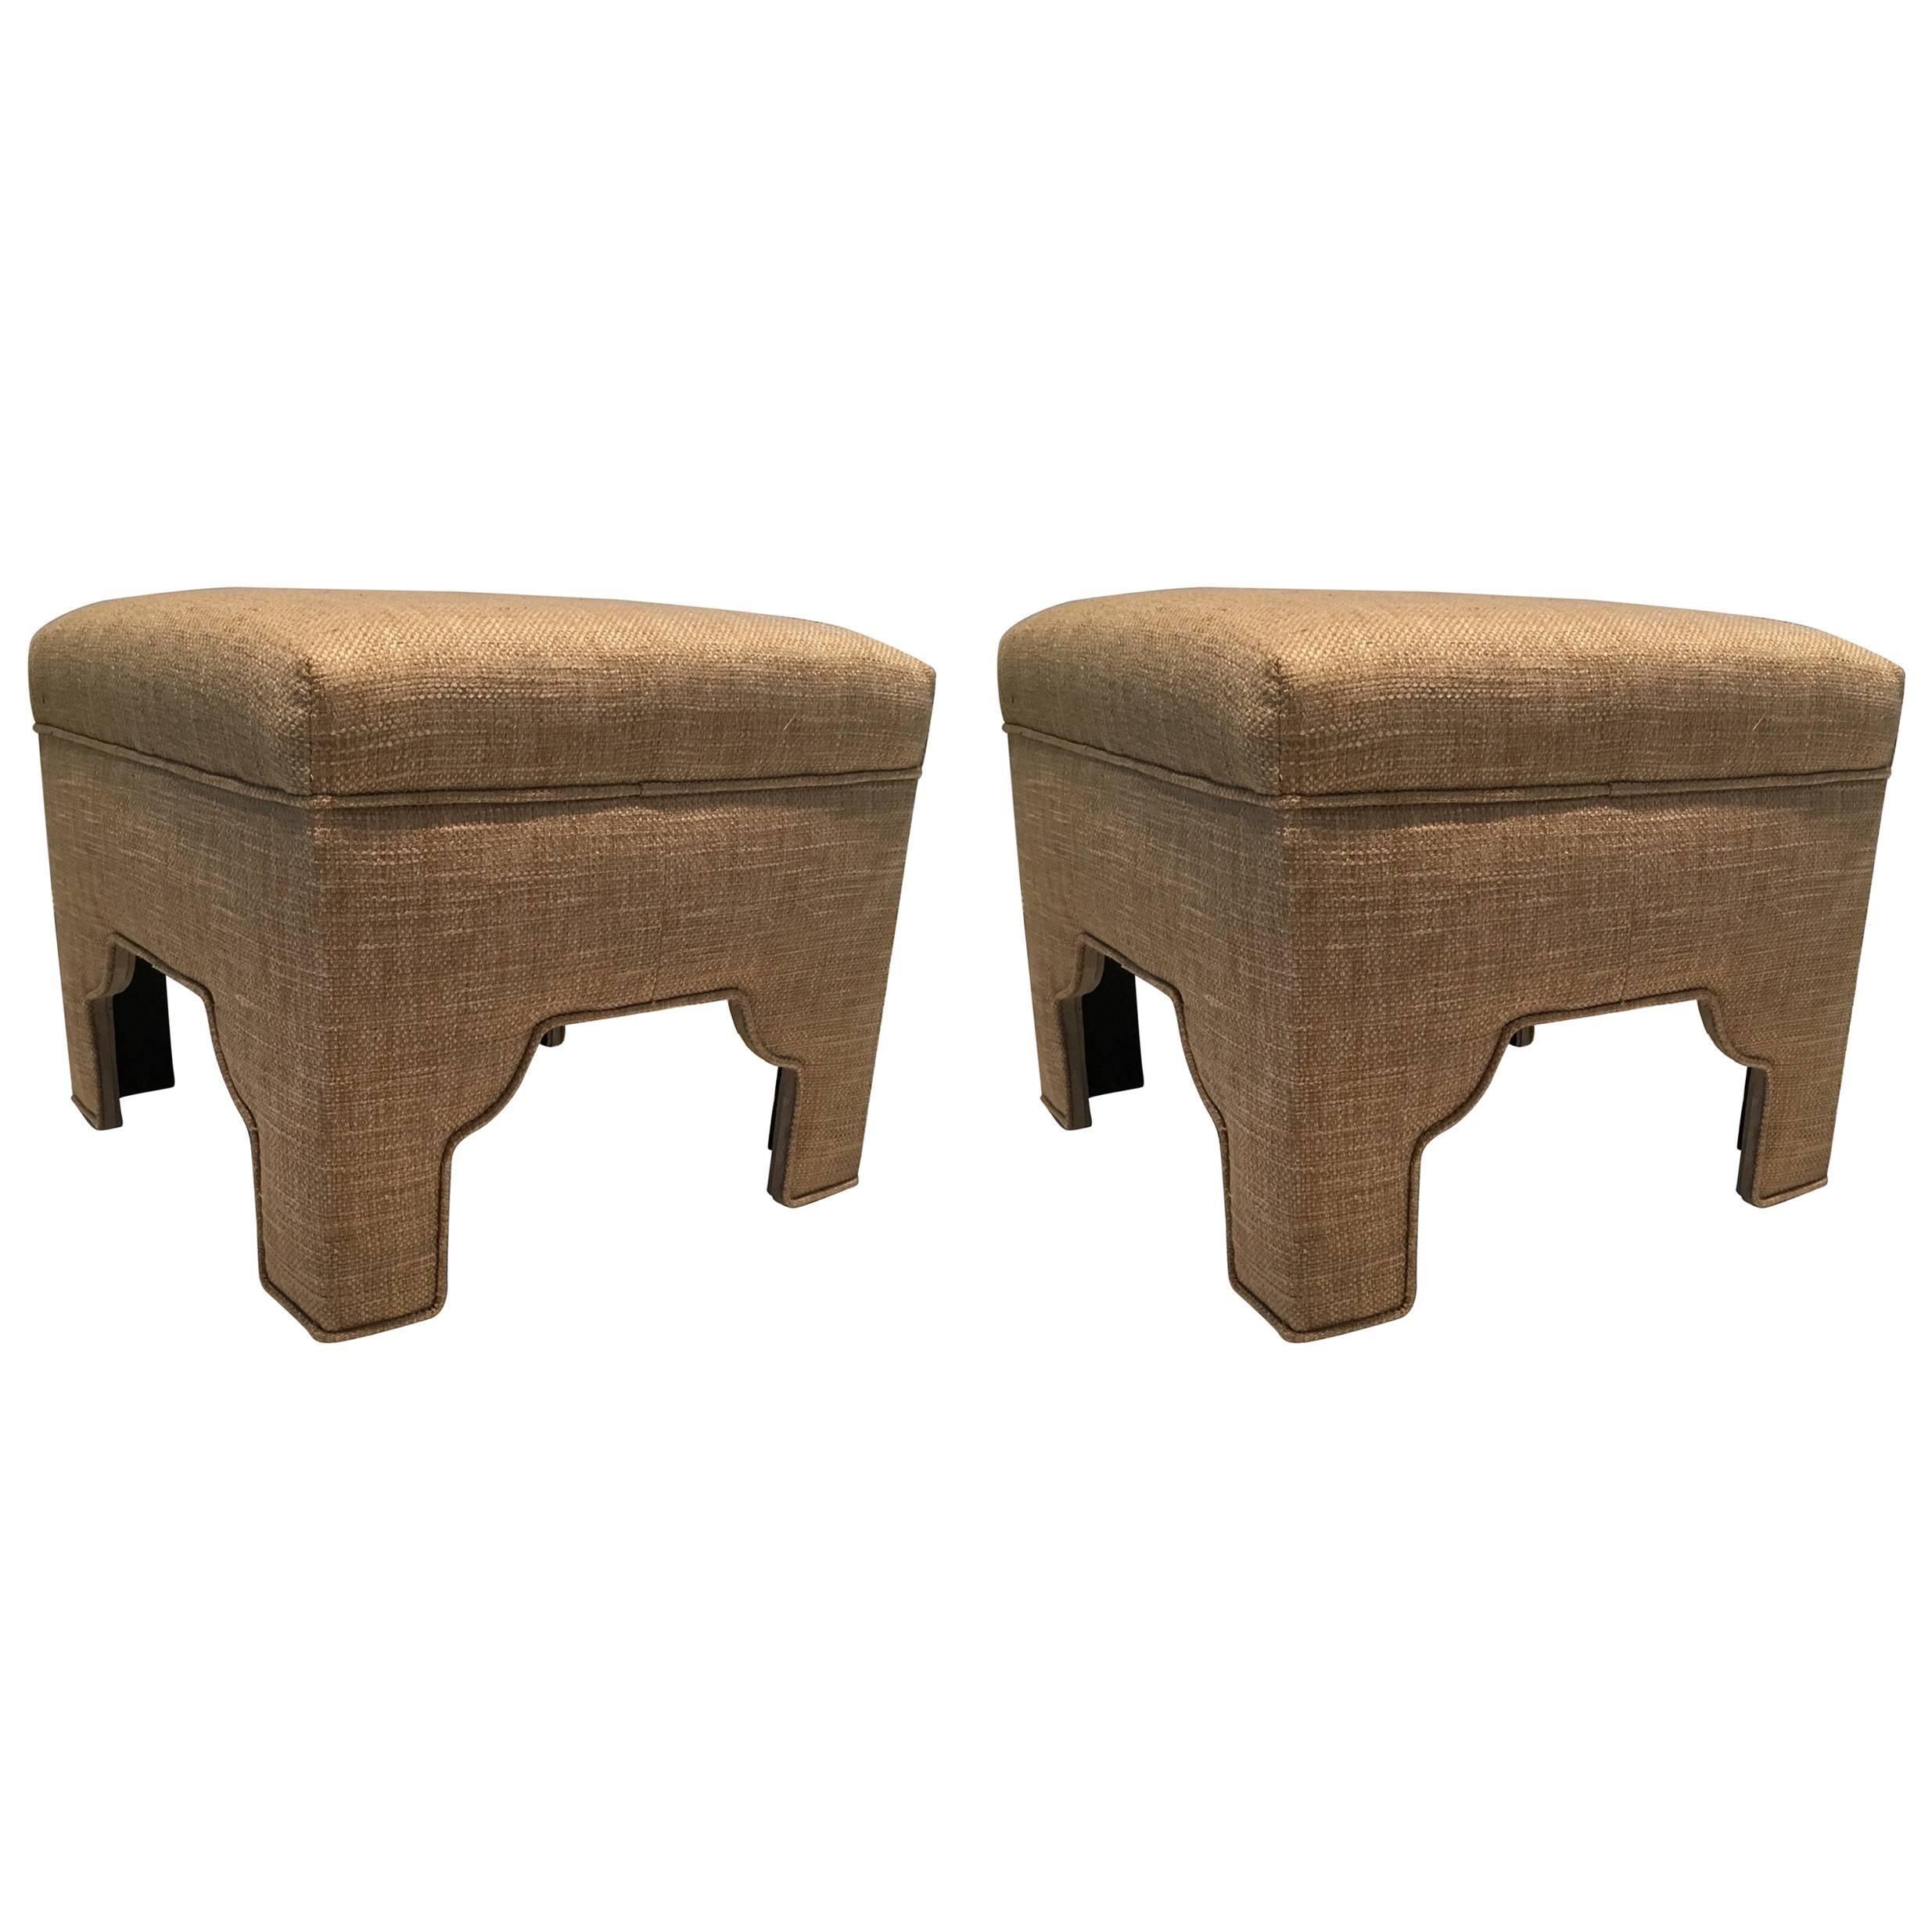 Sophisticated Custom Pair of Wheat Colored Linen and Cotton Ottomans